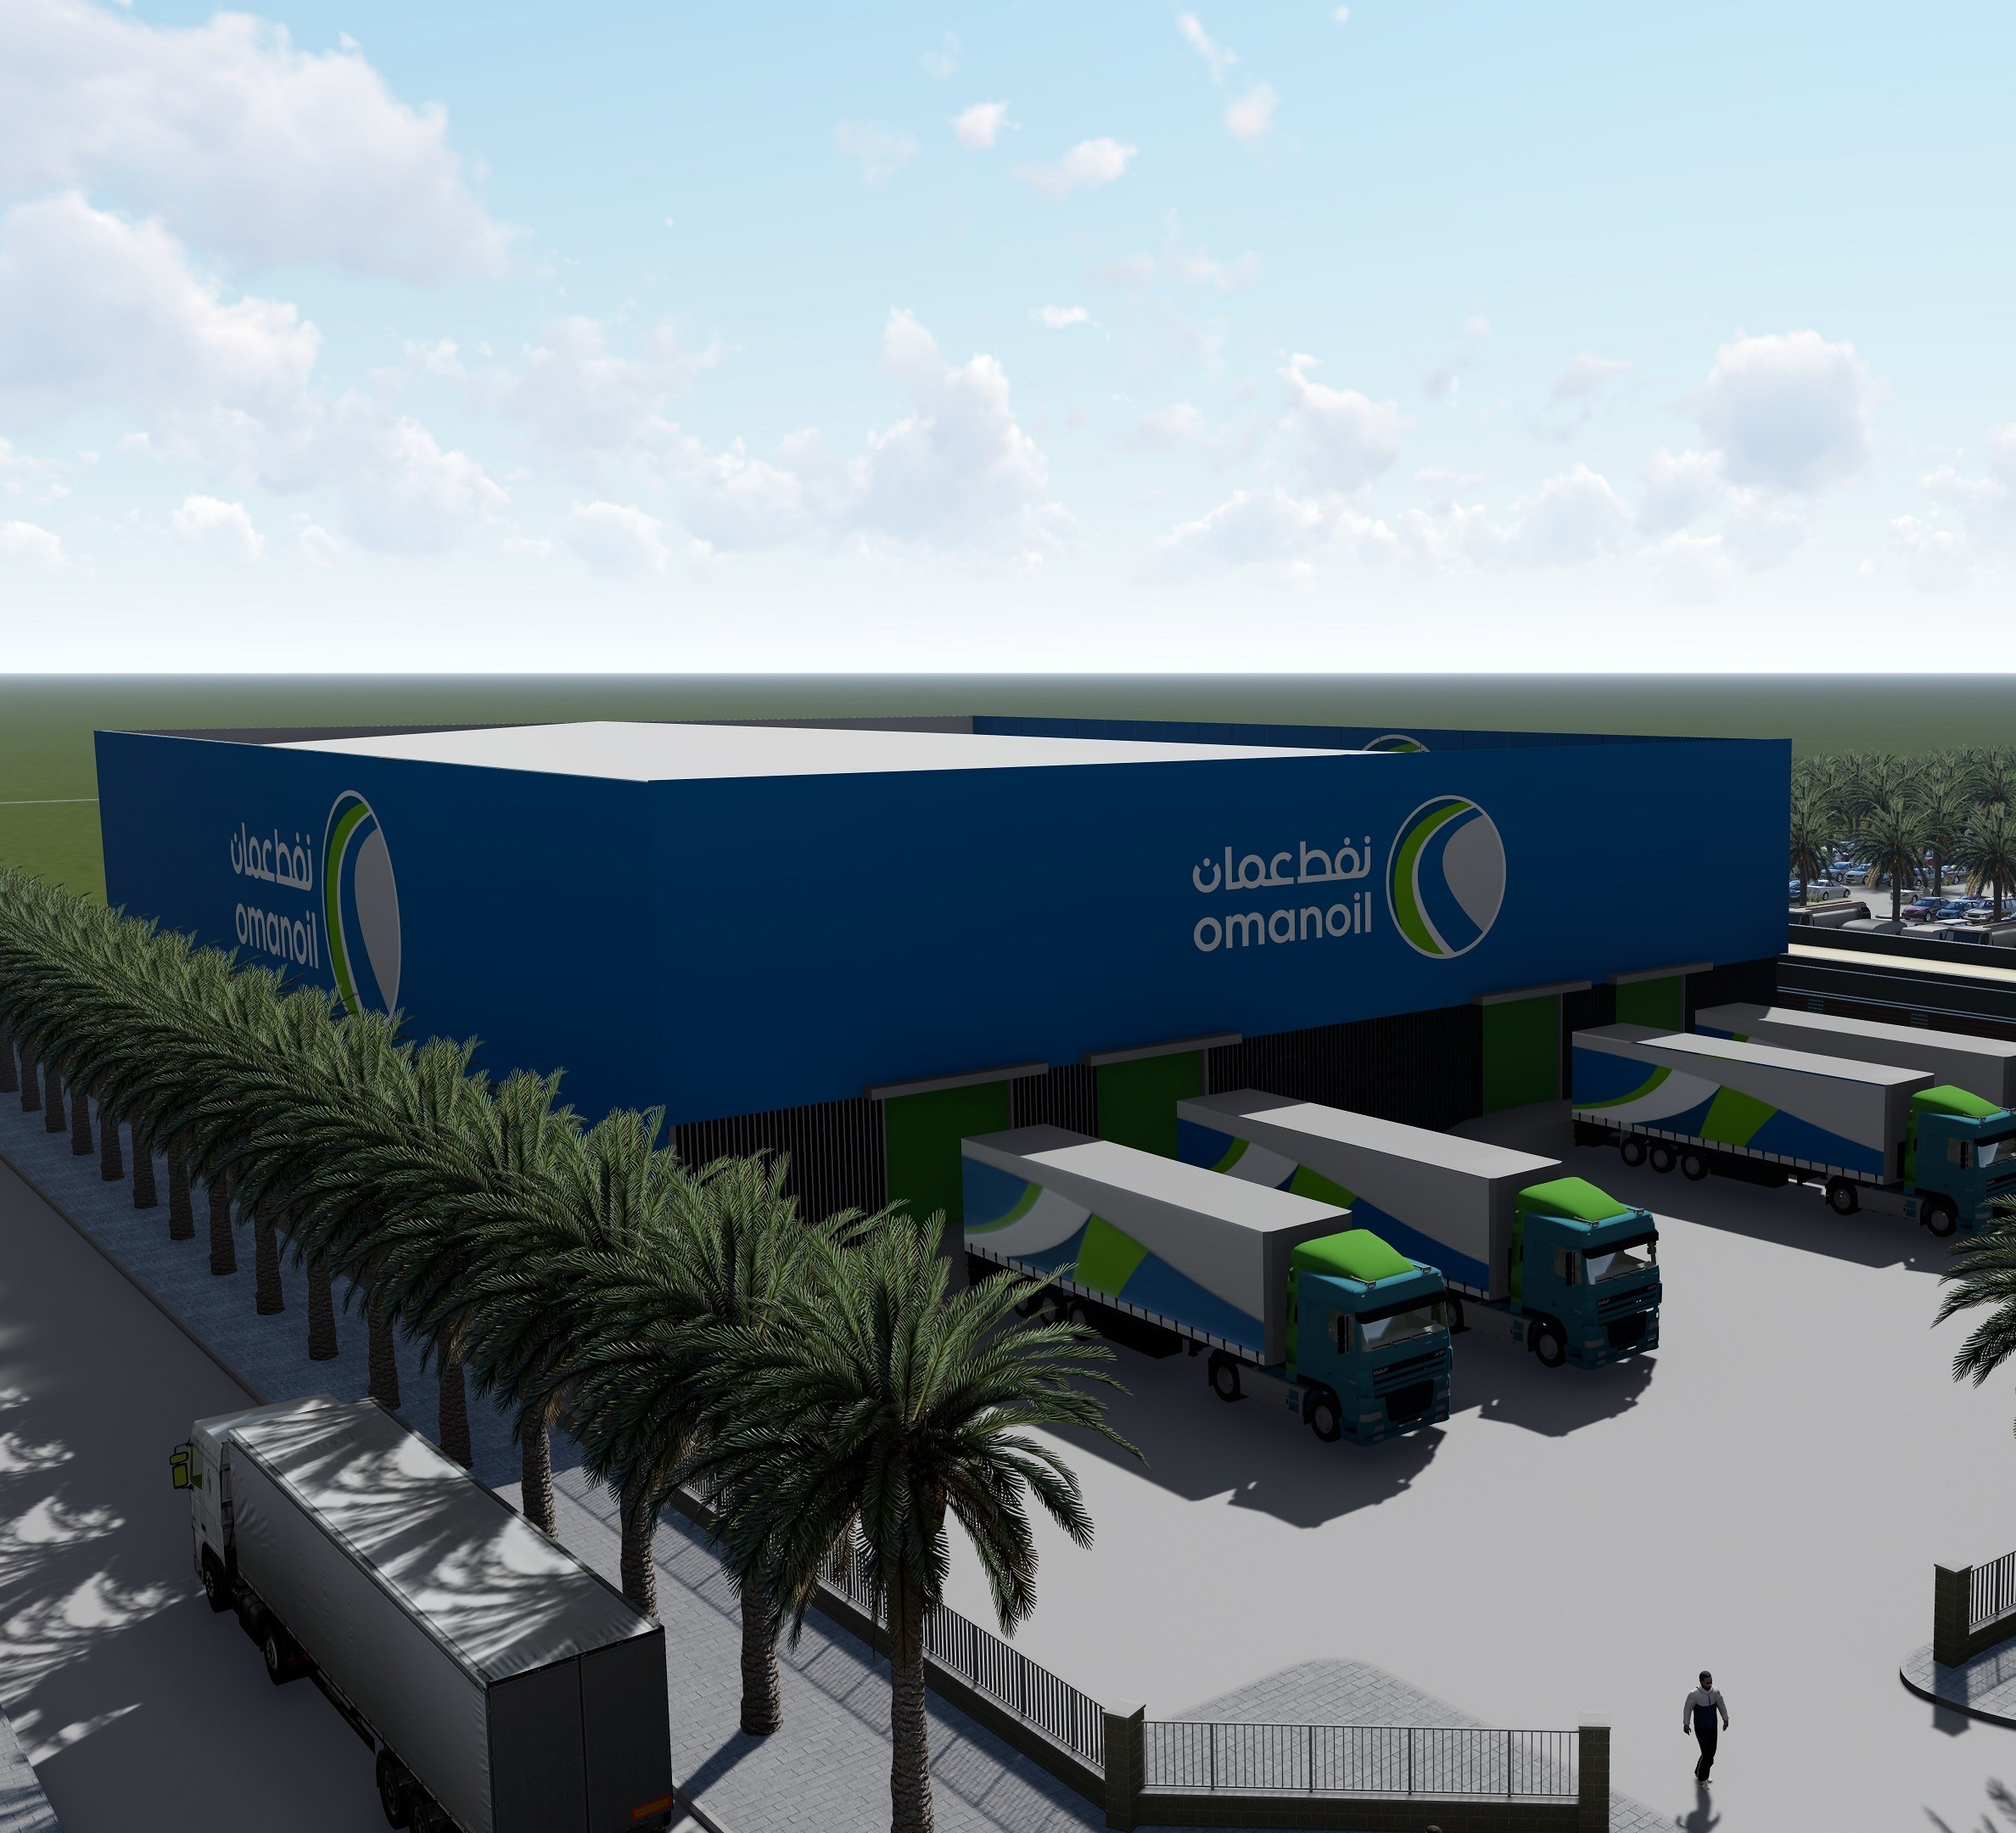 OMAN OIL MARKETING COMPANY SIGNS WITH AL MADINA LOGISTICS FOR PRODUCT STORAGE AND MANAGEMENT